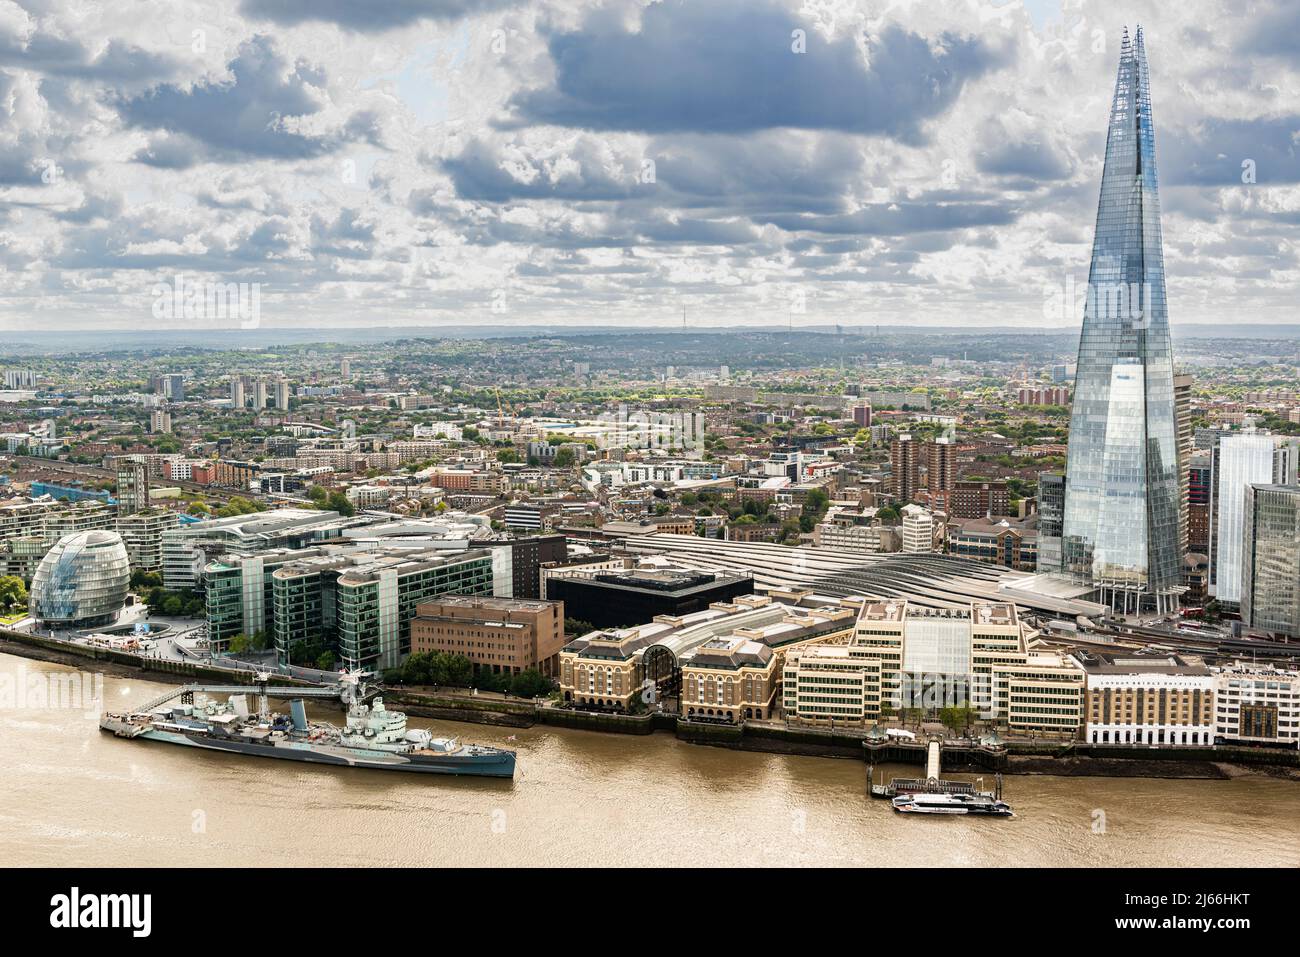 HMS Belfast and The Shard in London viewed from the Walkie Talkie building. Stock Photo